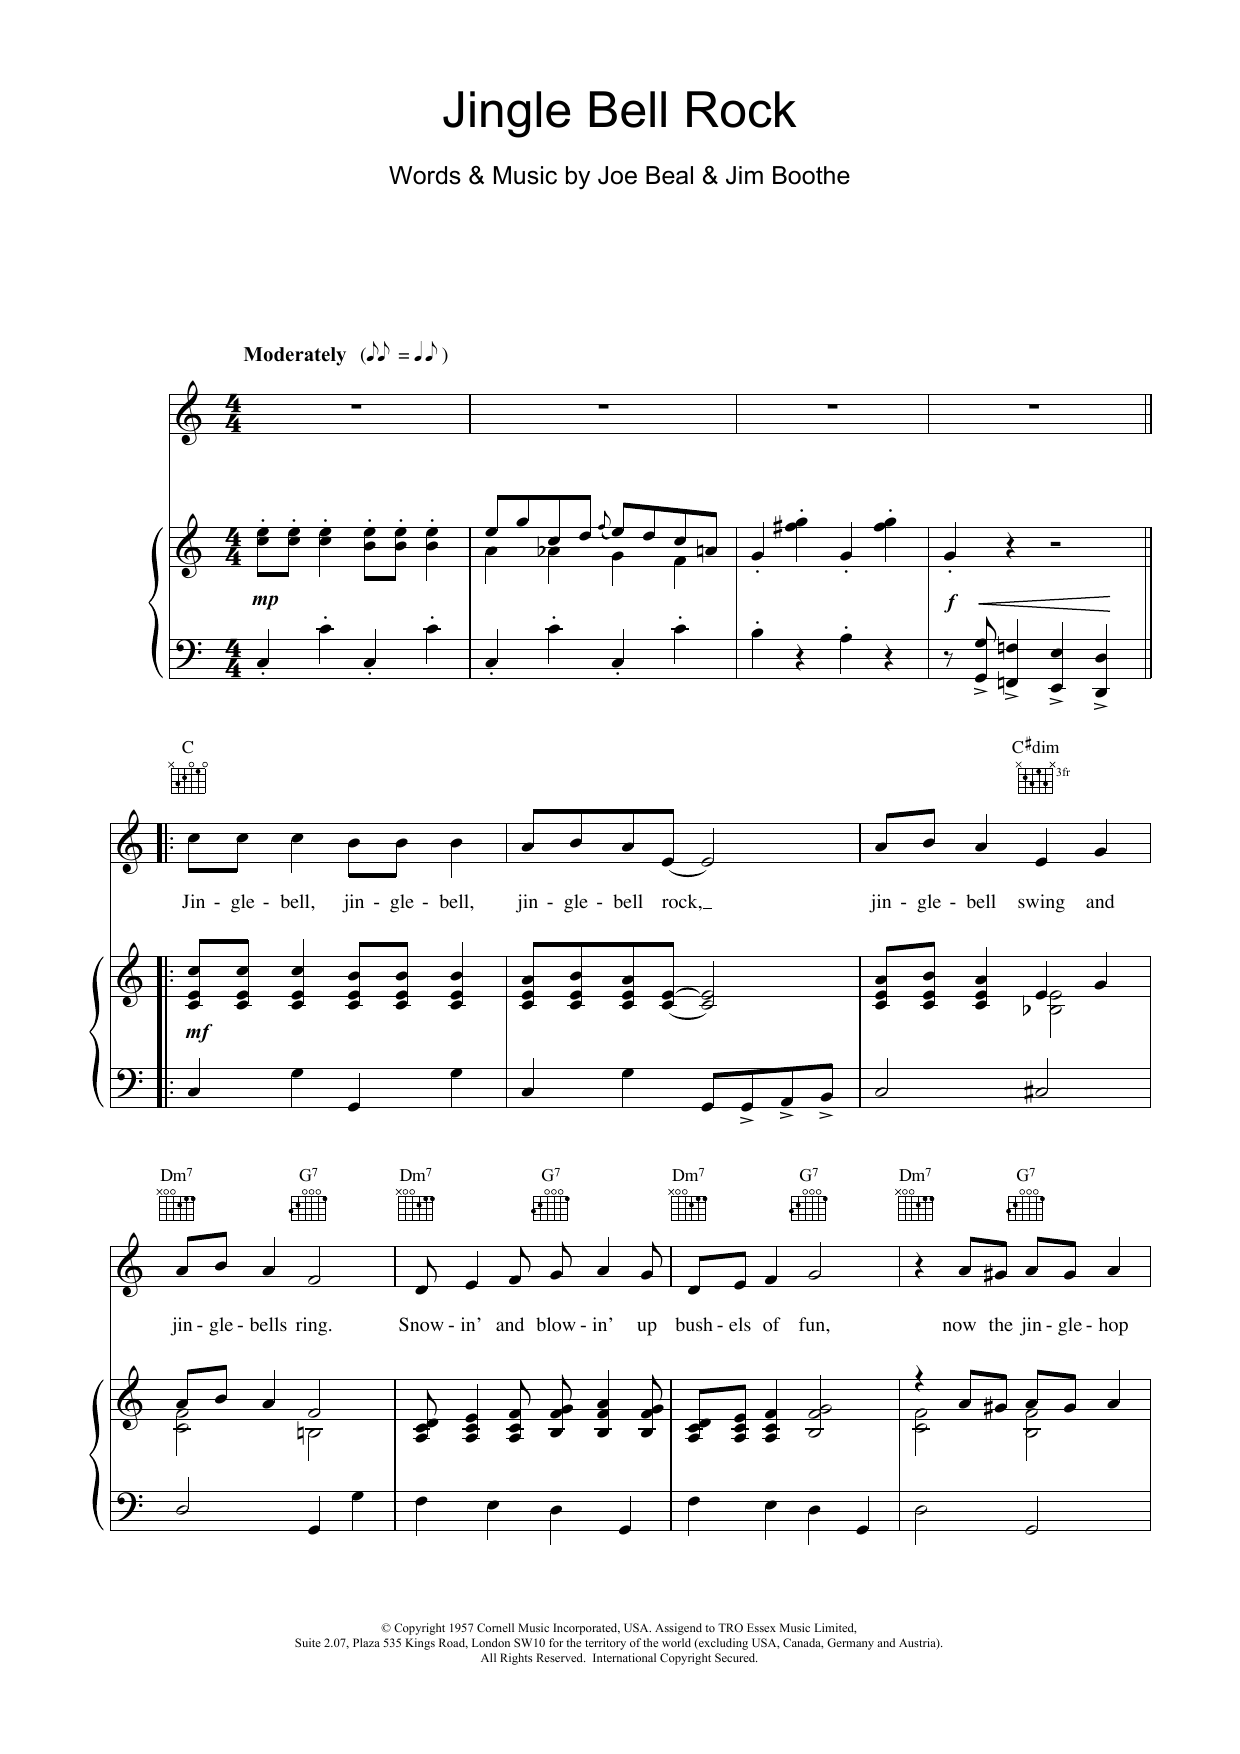 Bobby Helms Jingle Bell Rock sheet music notes and chords. Download Printable PDF.